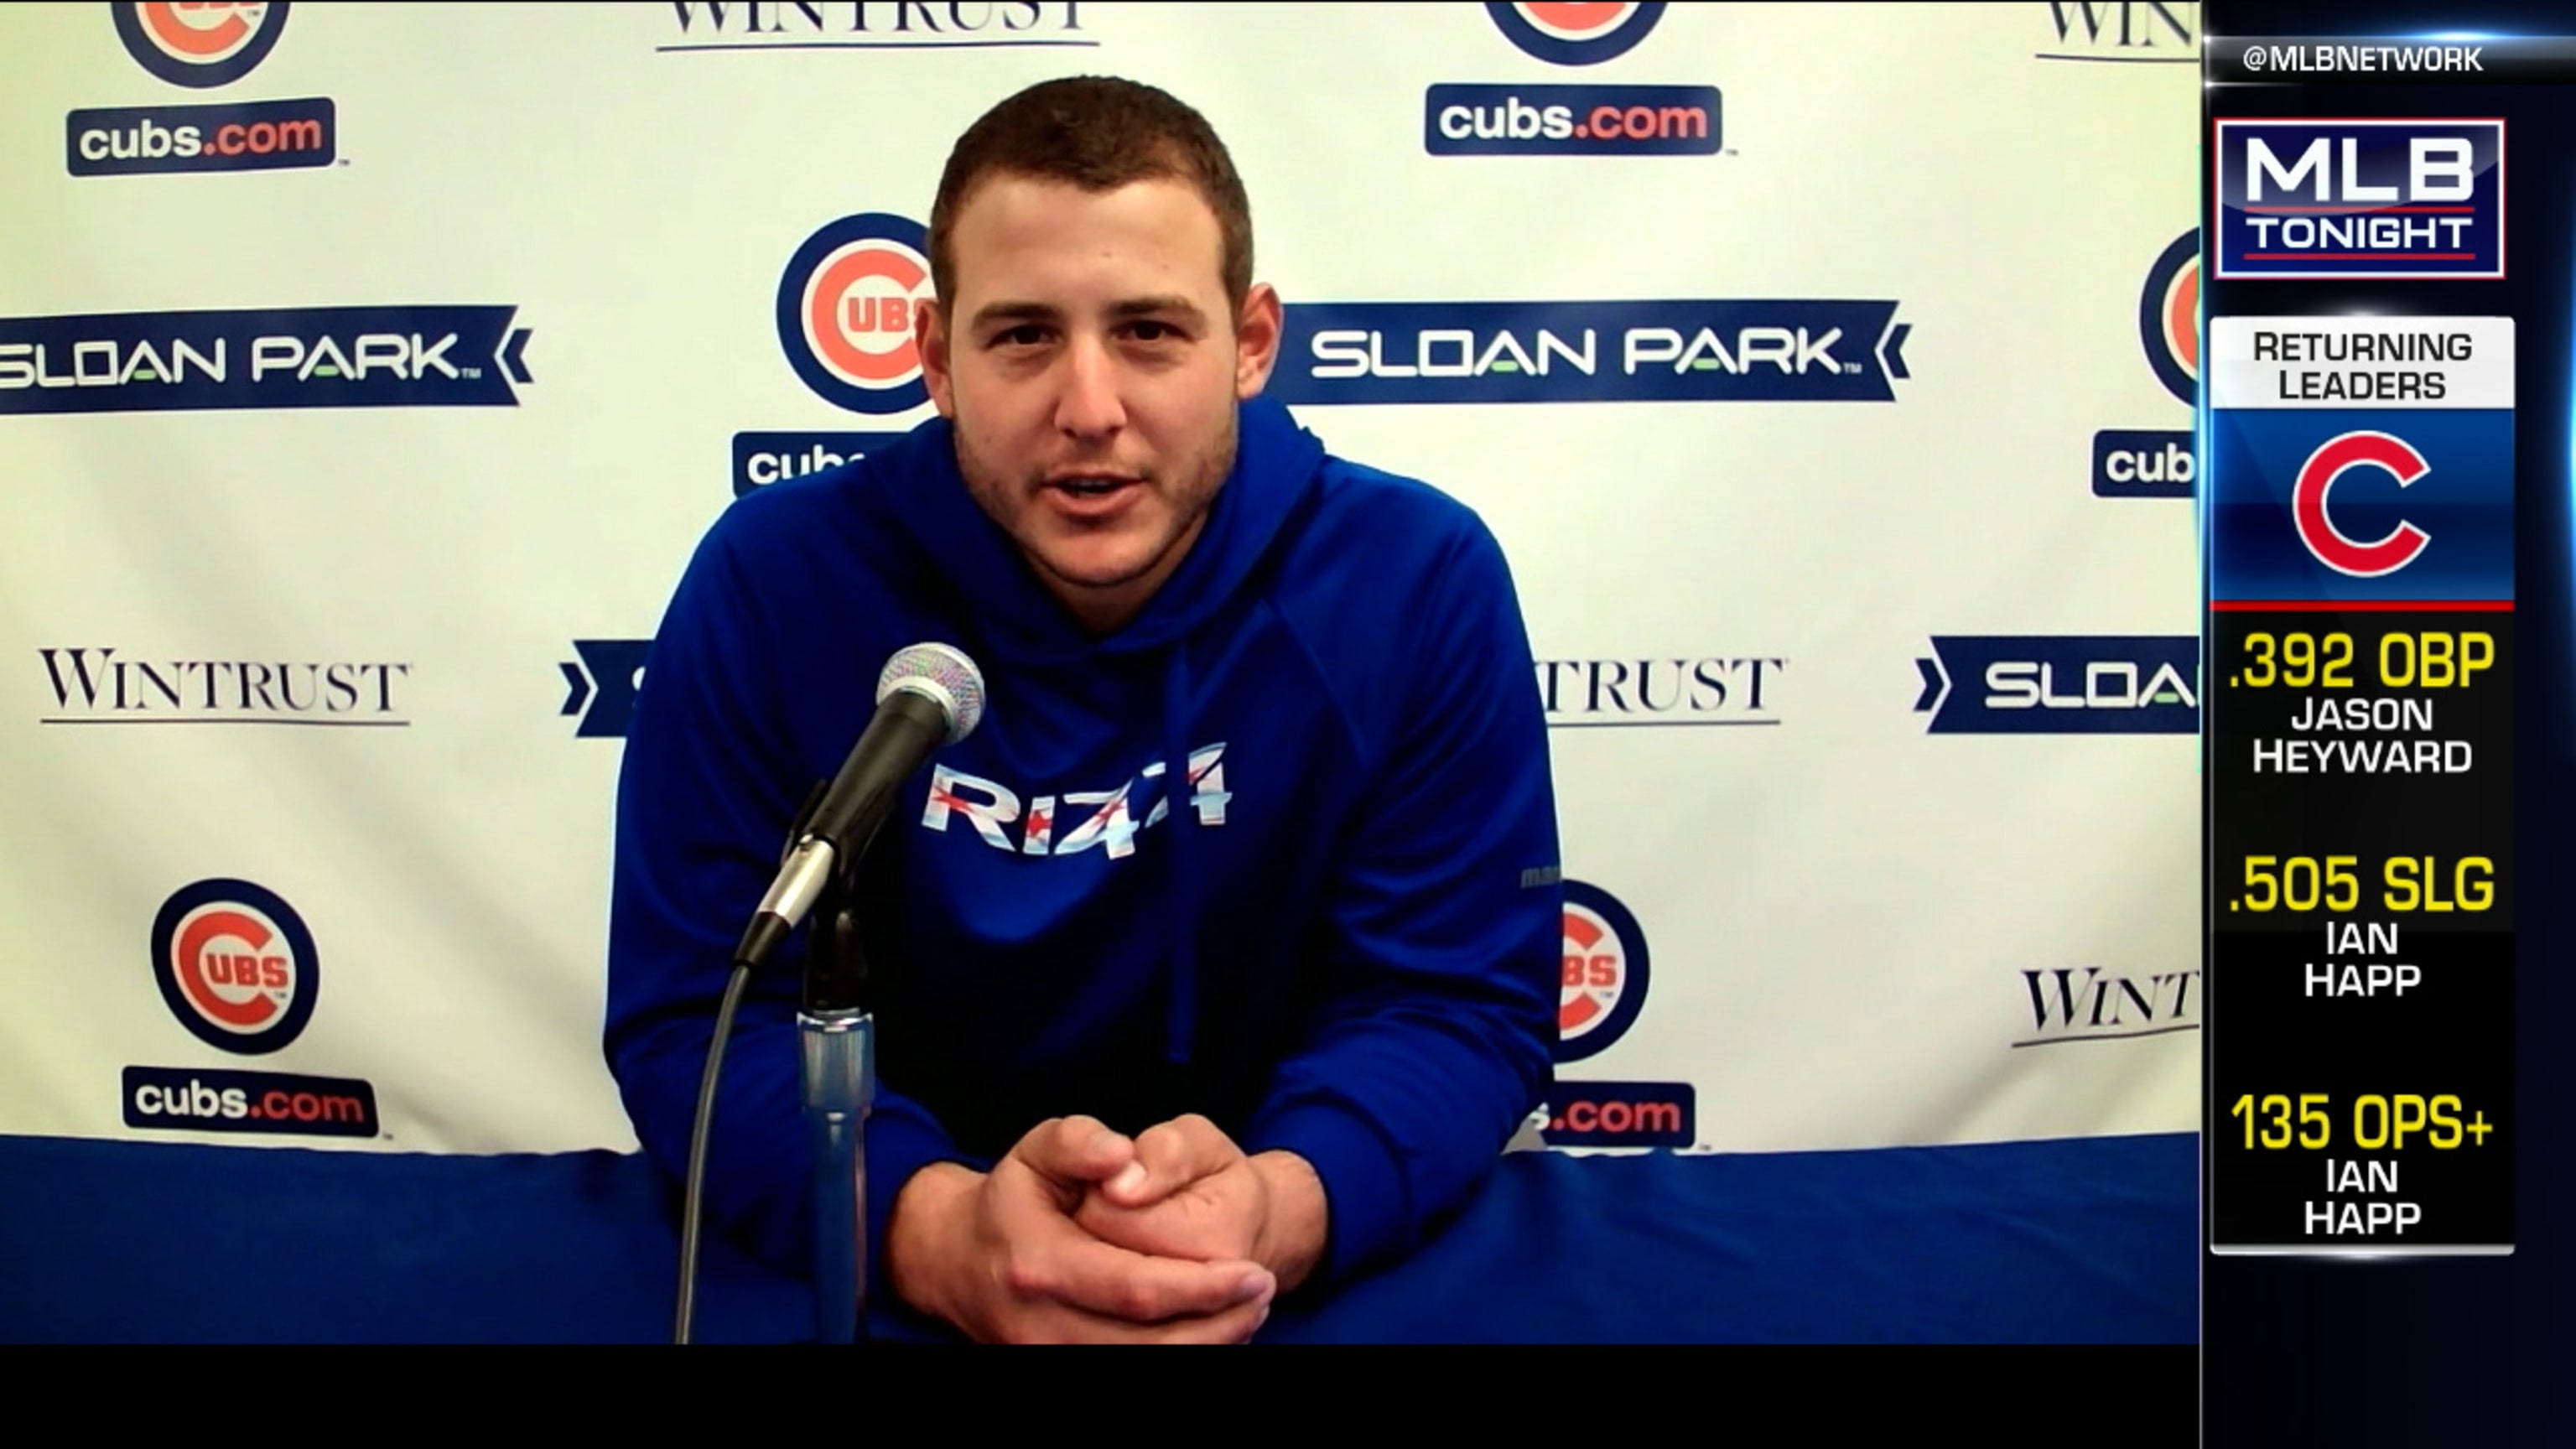 Hoyer anticipates keeping Anthony Rizzo in Chicago